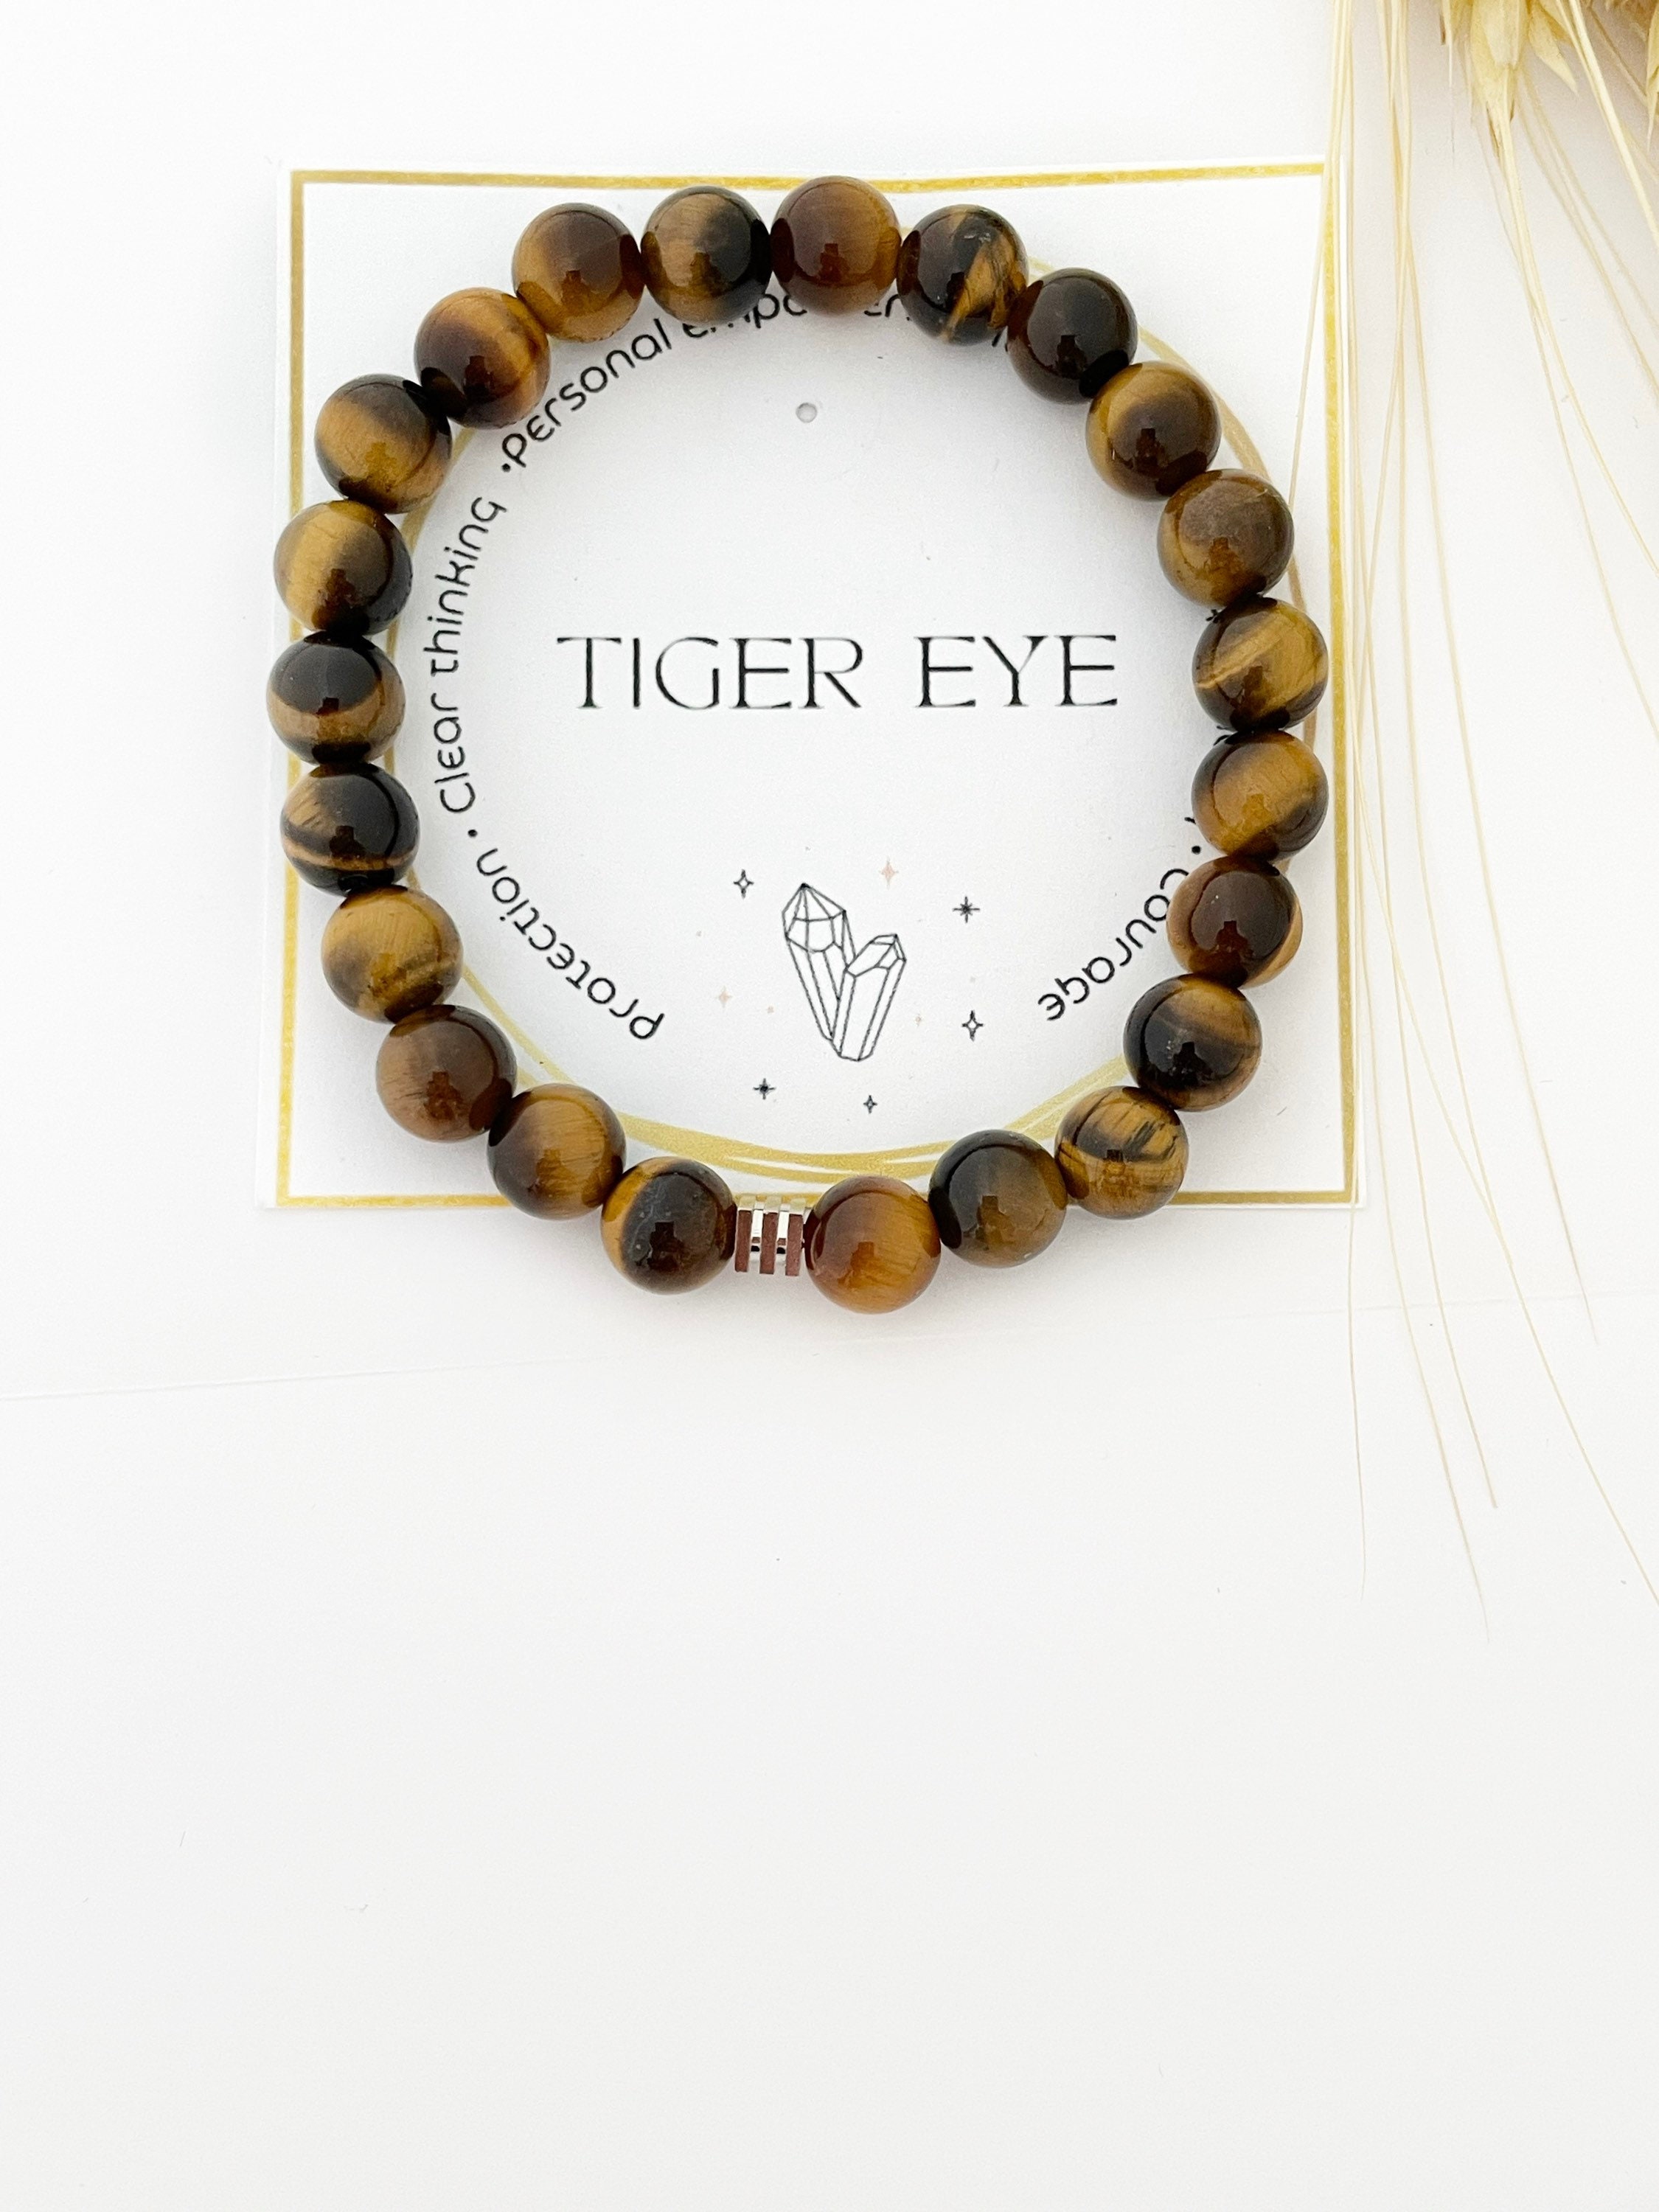 Everything You Need To Know About Tigers Eye Gemstone! – PlayHardLookDope